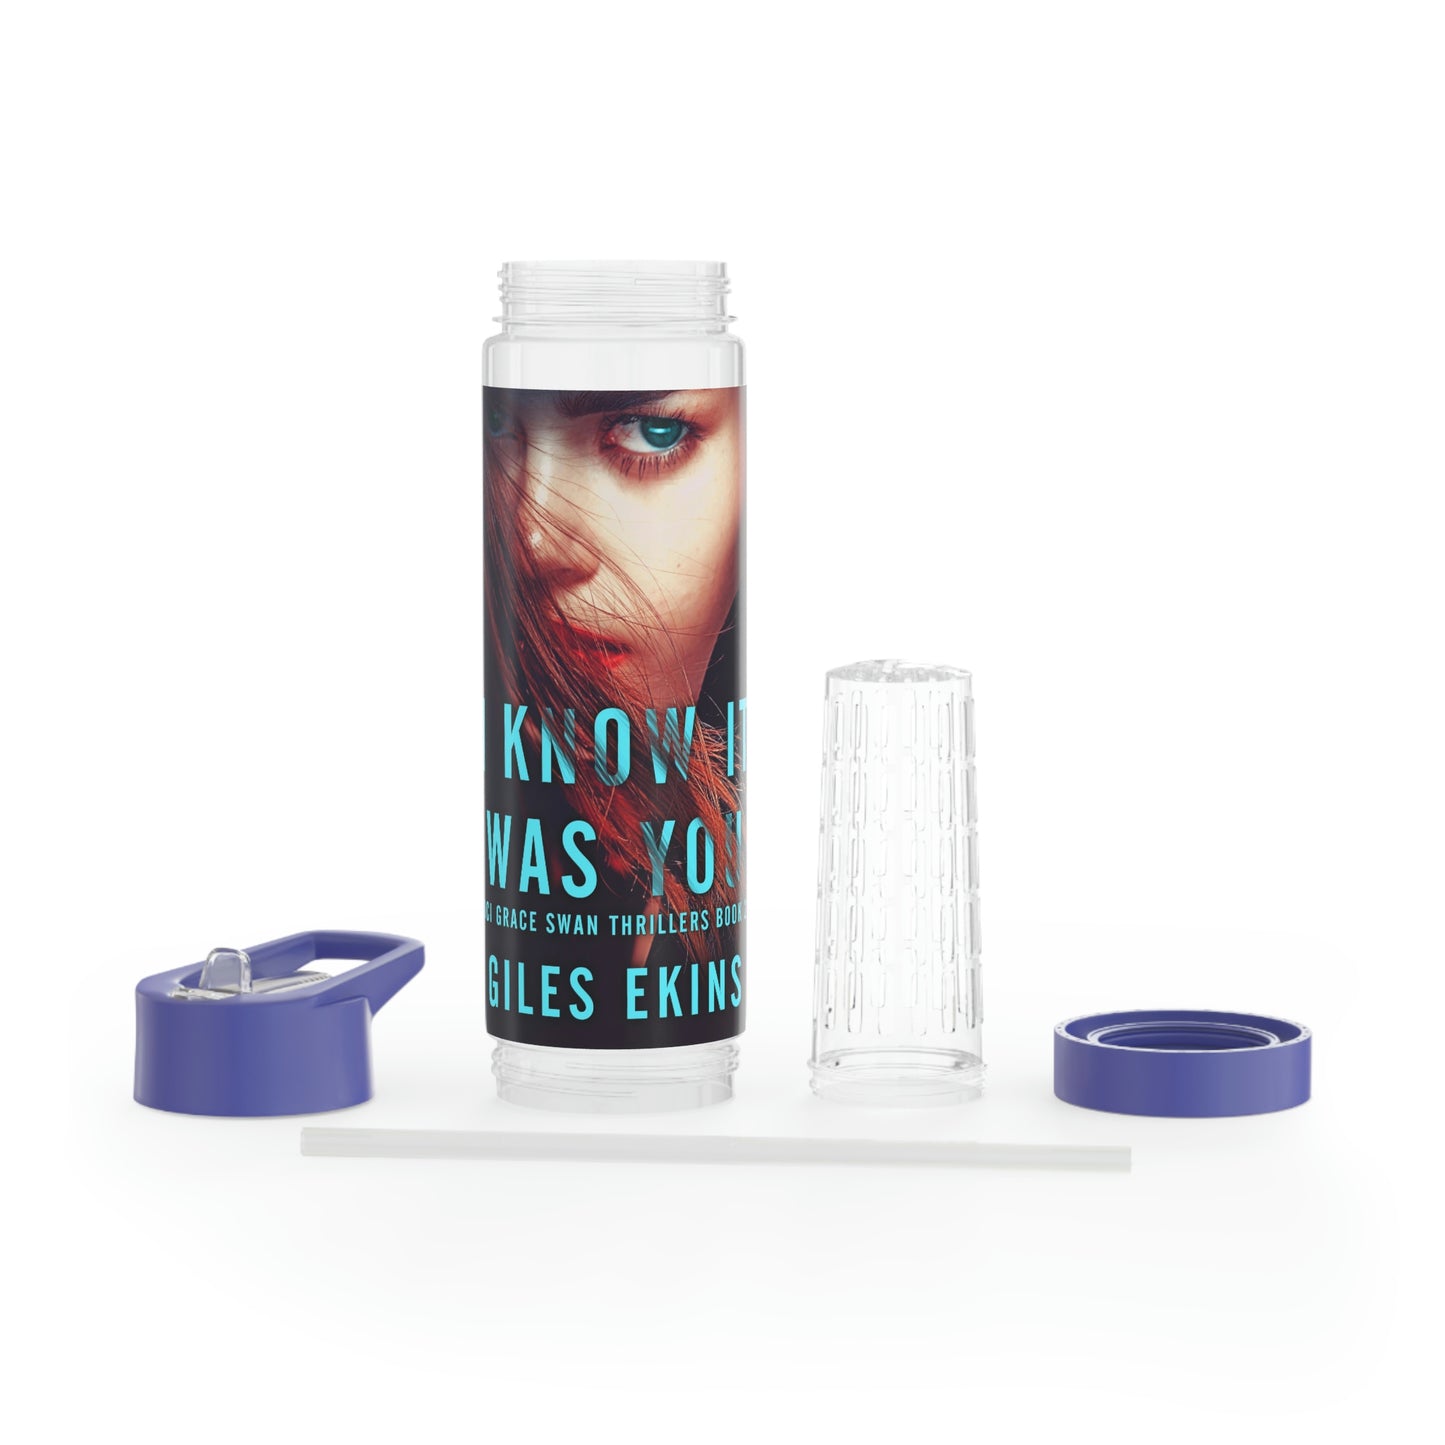 I Know It Was You - Infuser Water Bottle